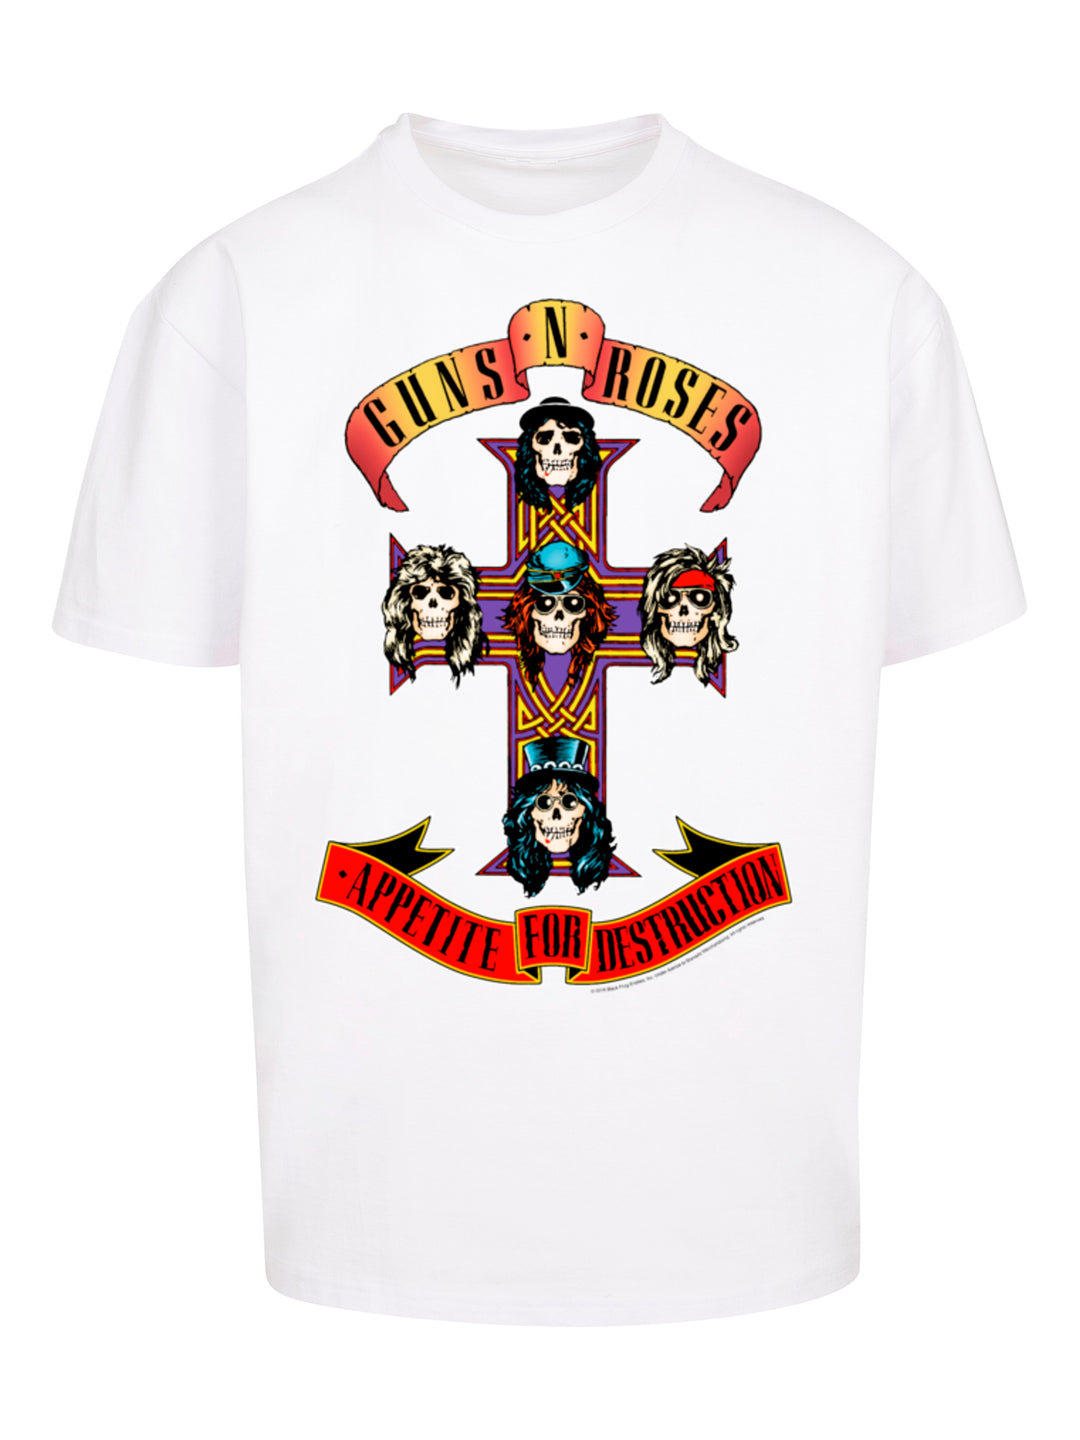 Guns 'n' Roses Appetite For Destruction with Heavy Oversize Tee